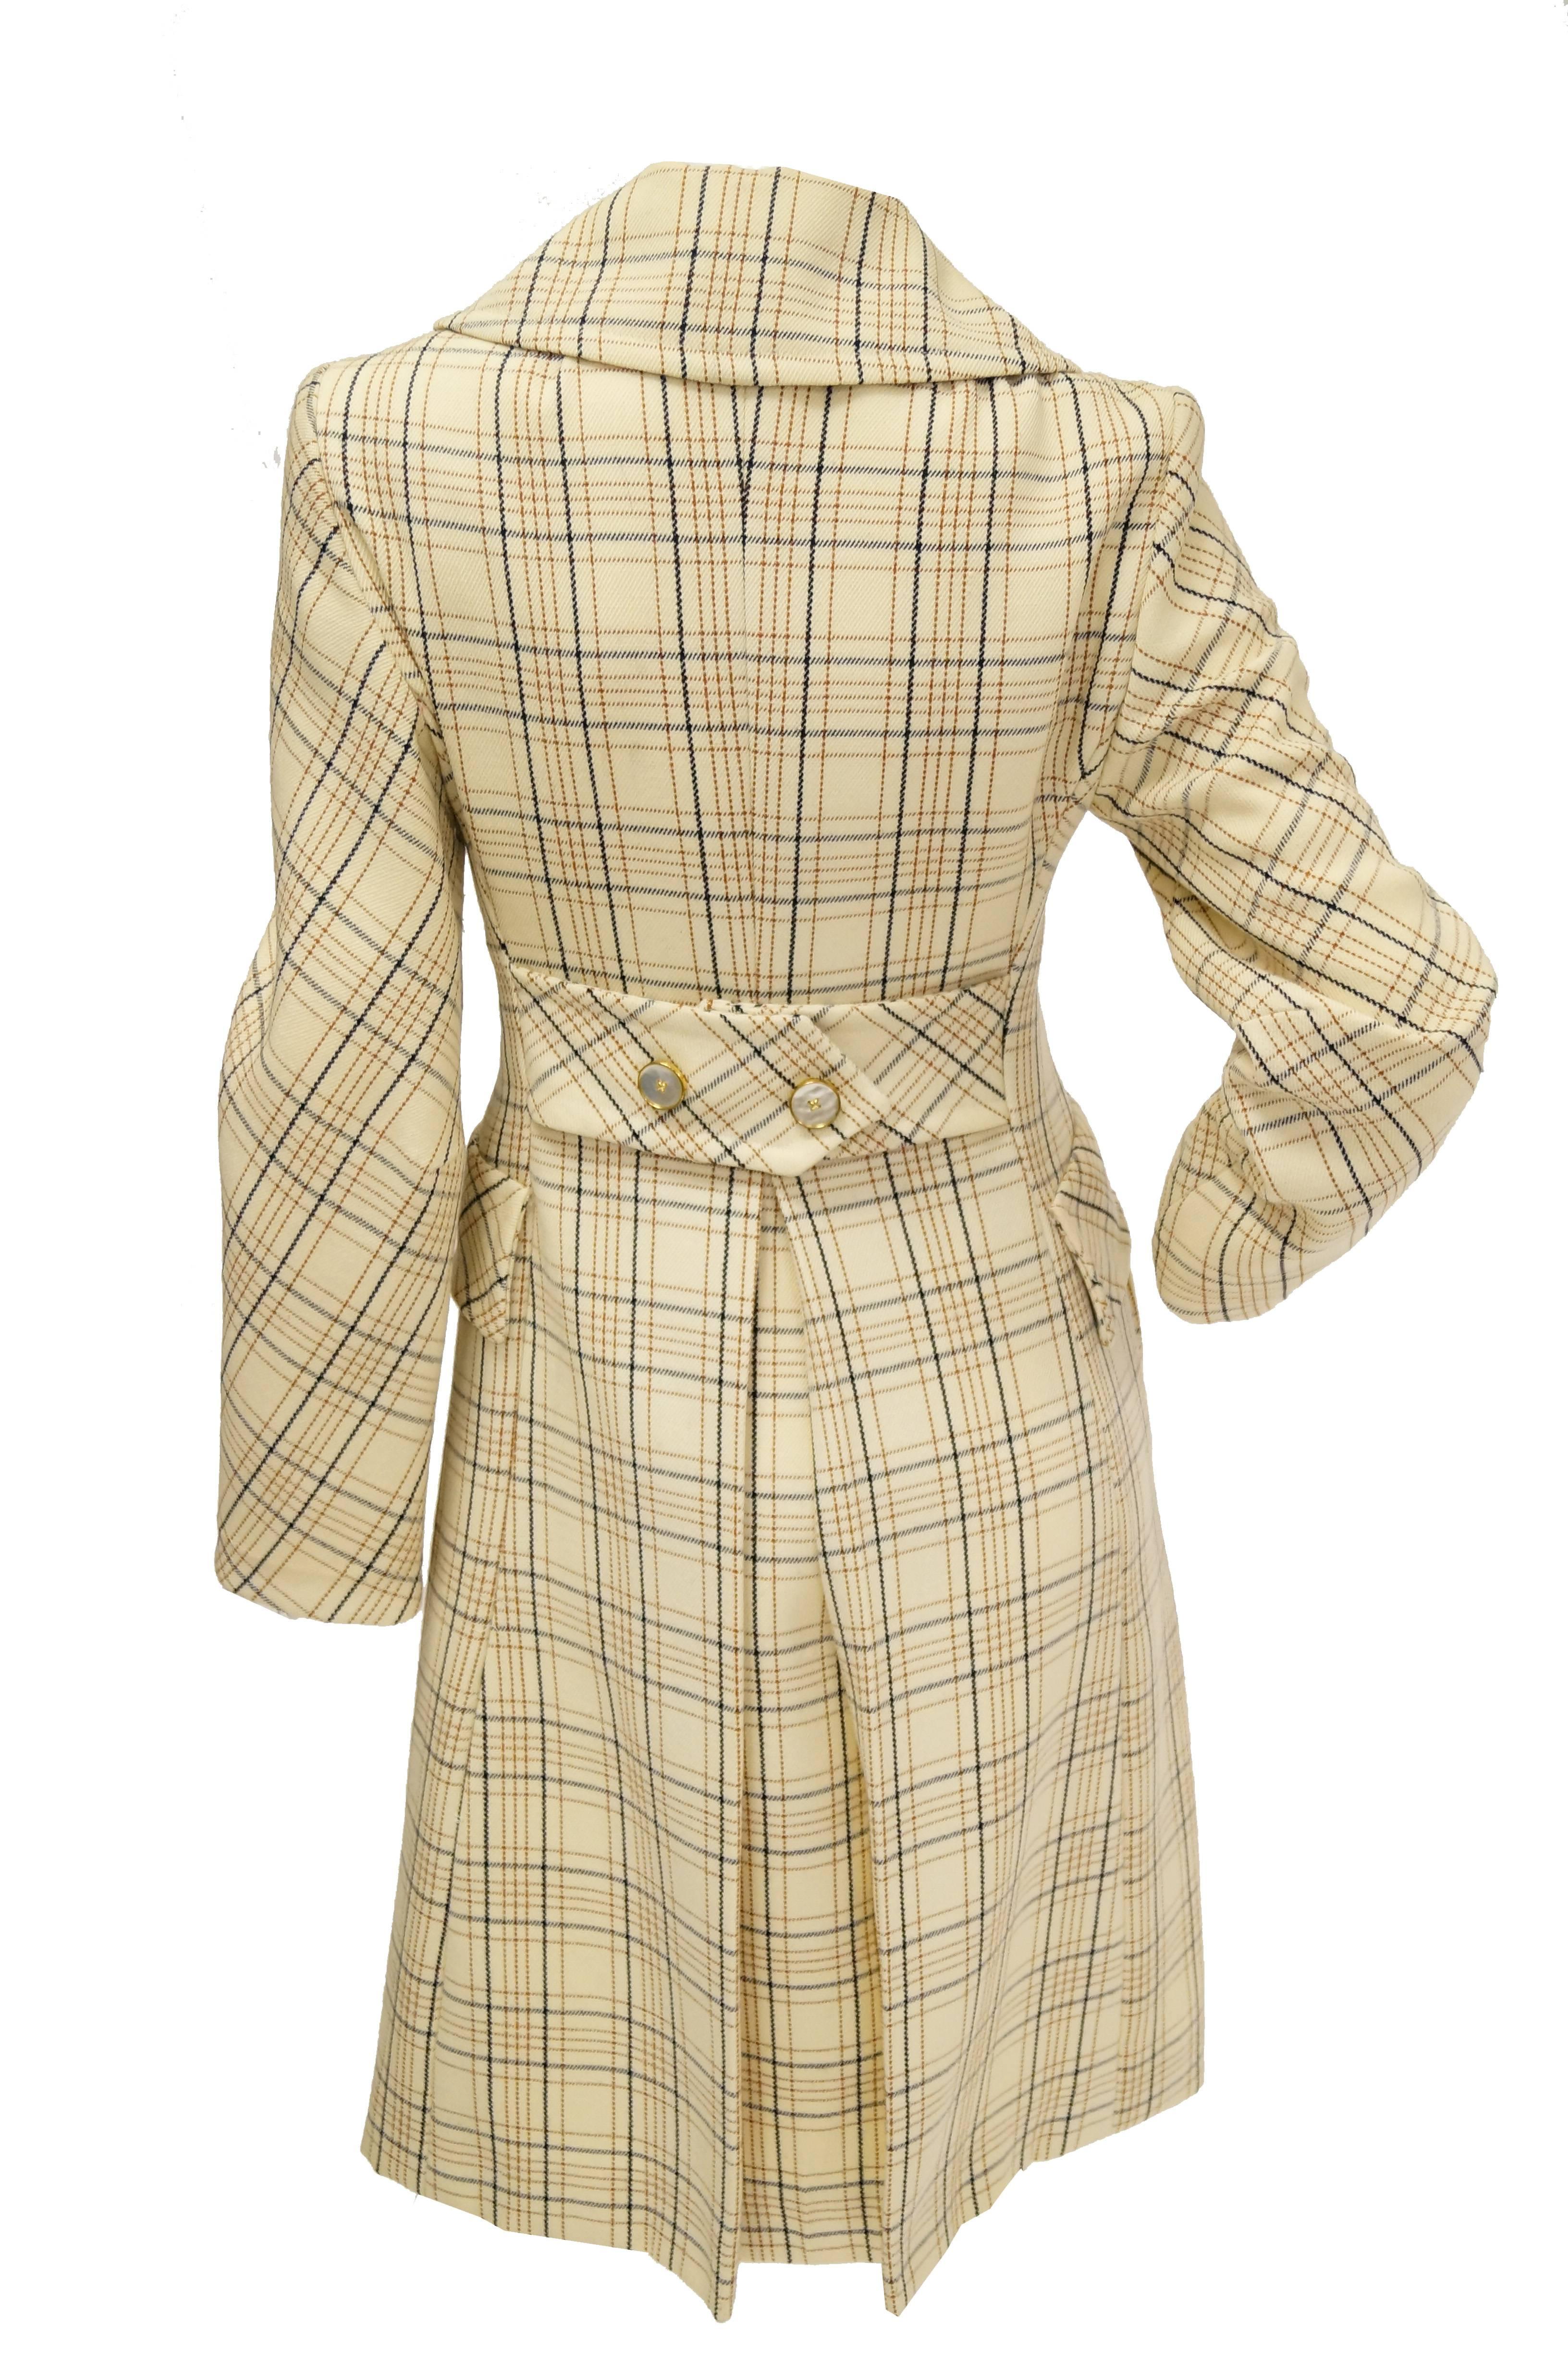  1960s Bill Blass Cream Wool Plaid Coat with Mother of Pearl Buttons 1